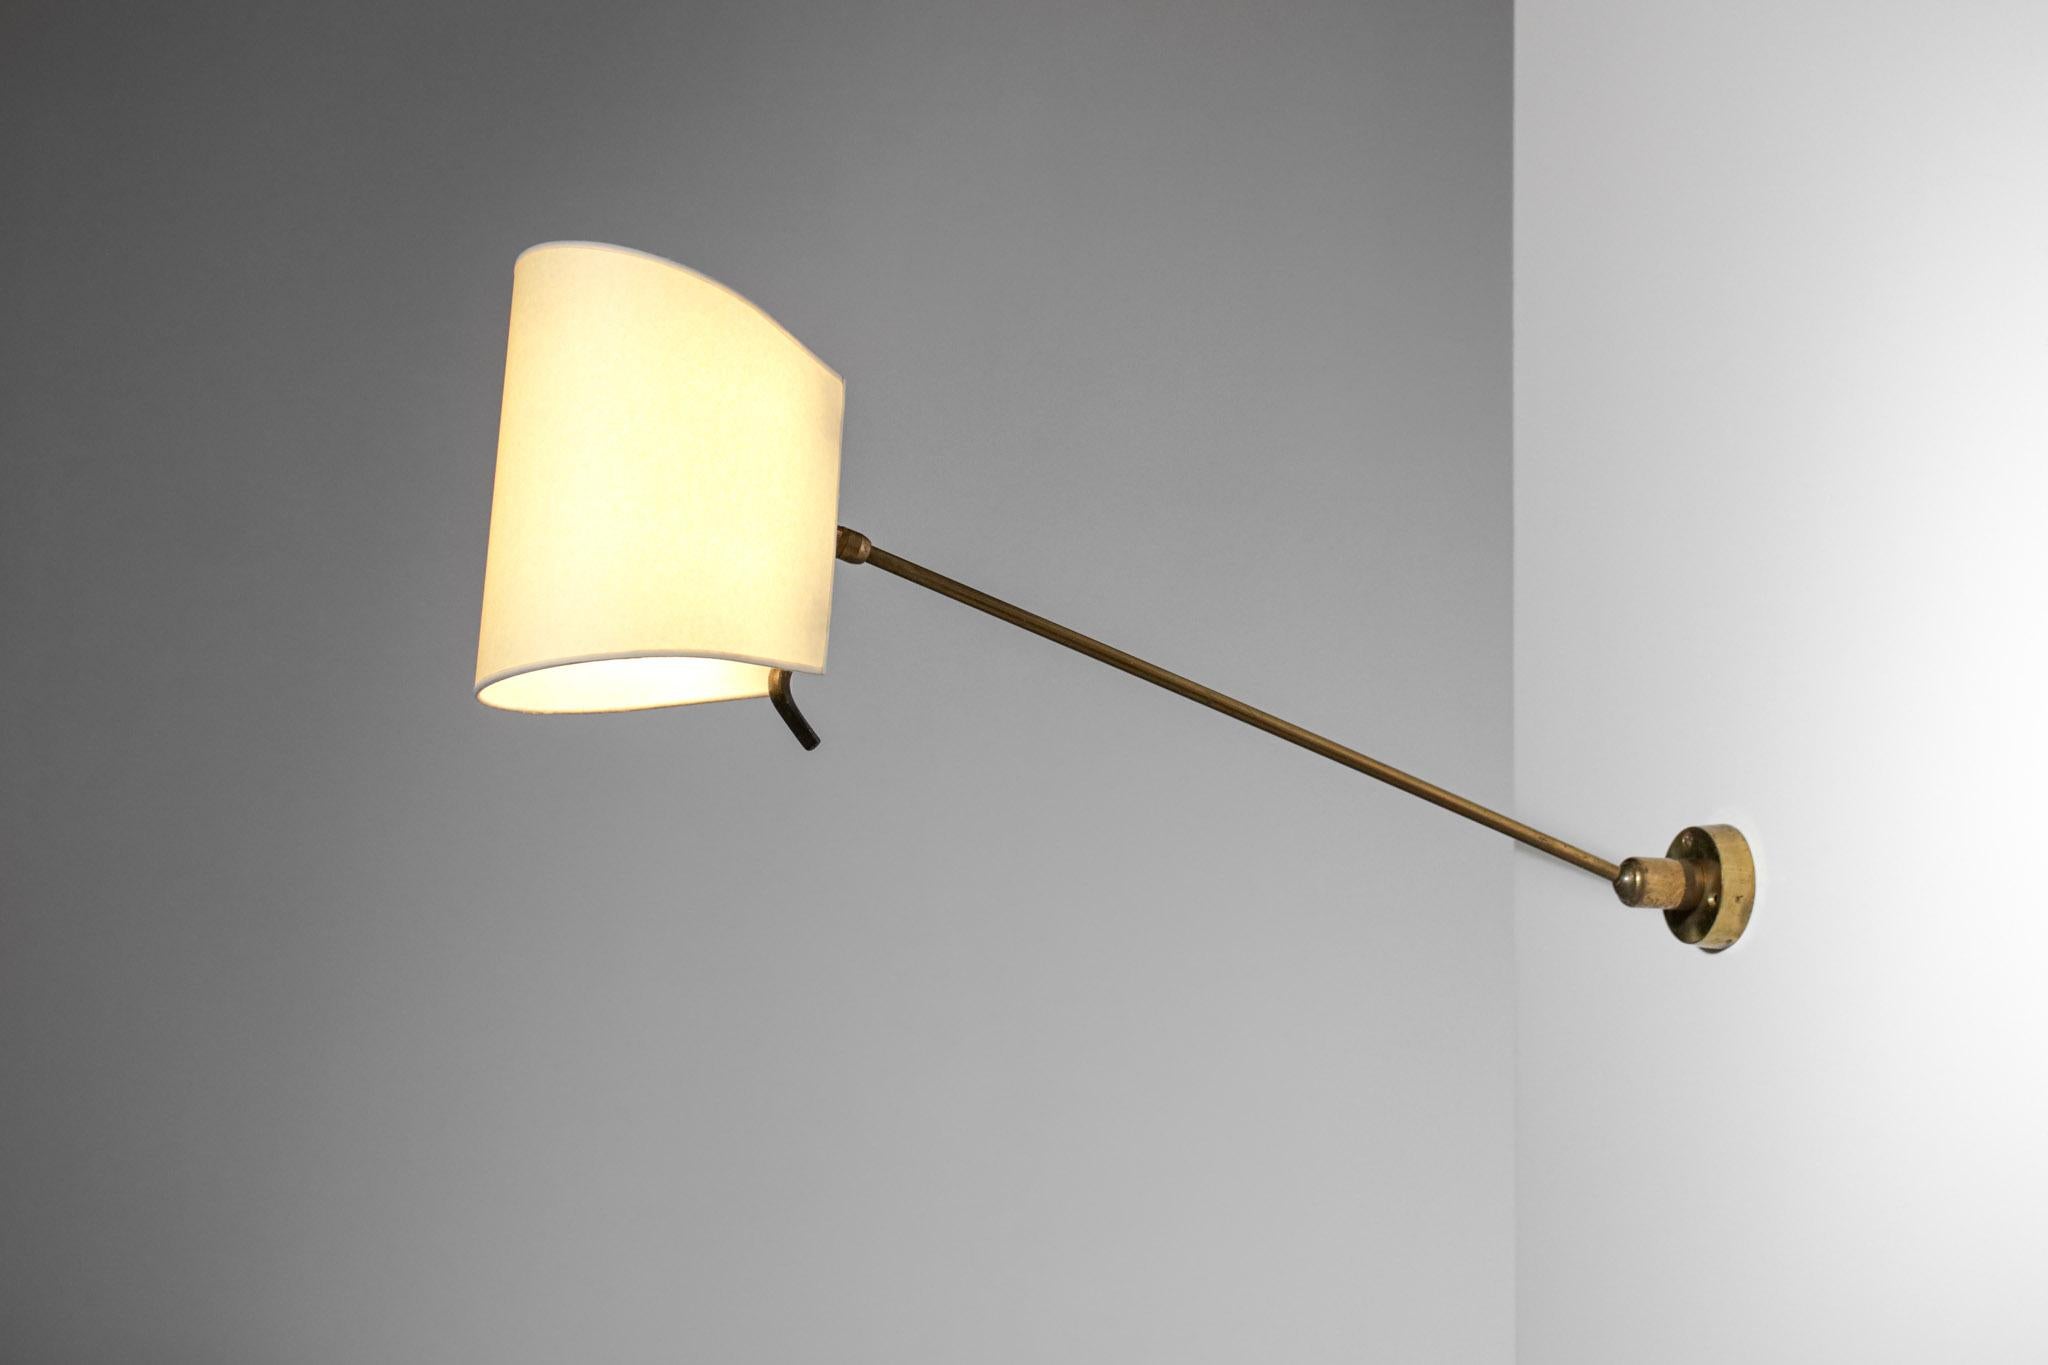 Mid-20th Century French wall lamp on ball joint 50's in style of Robert mathieu or pierre g- E242